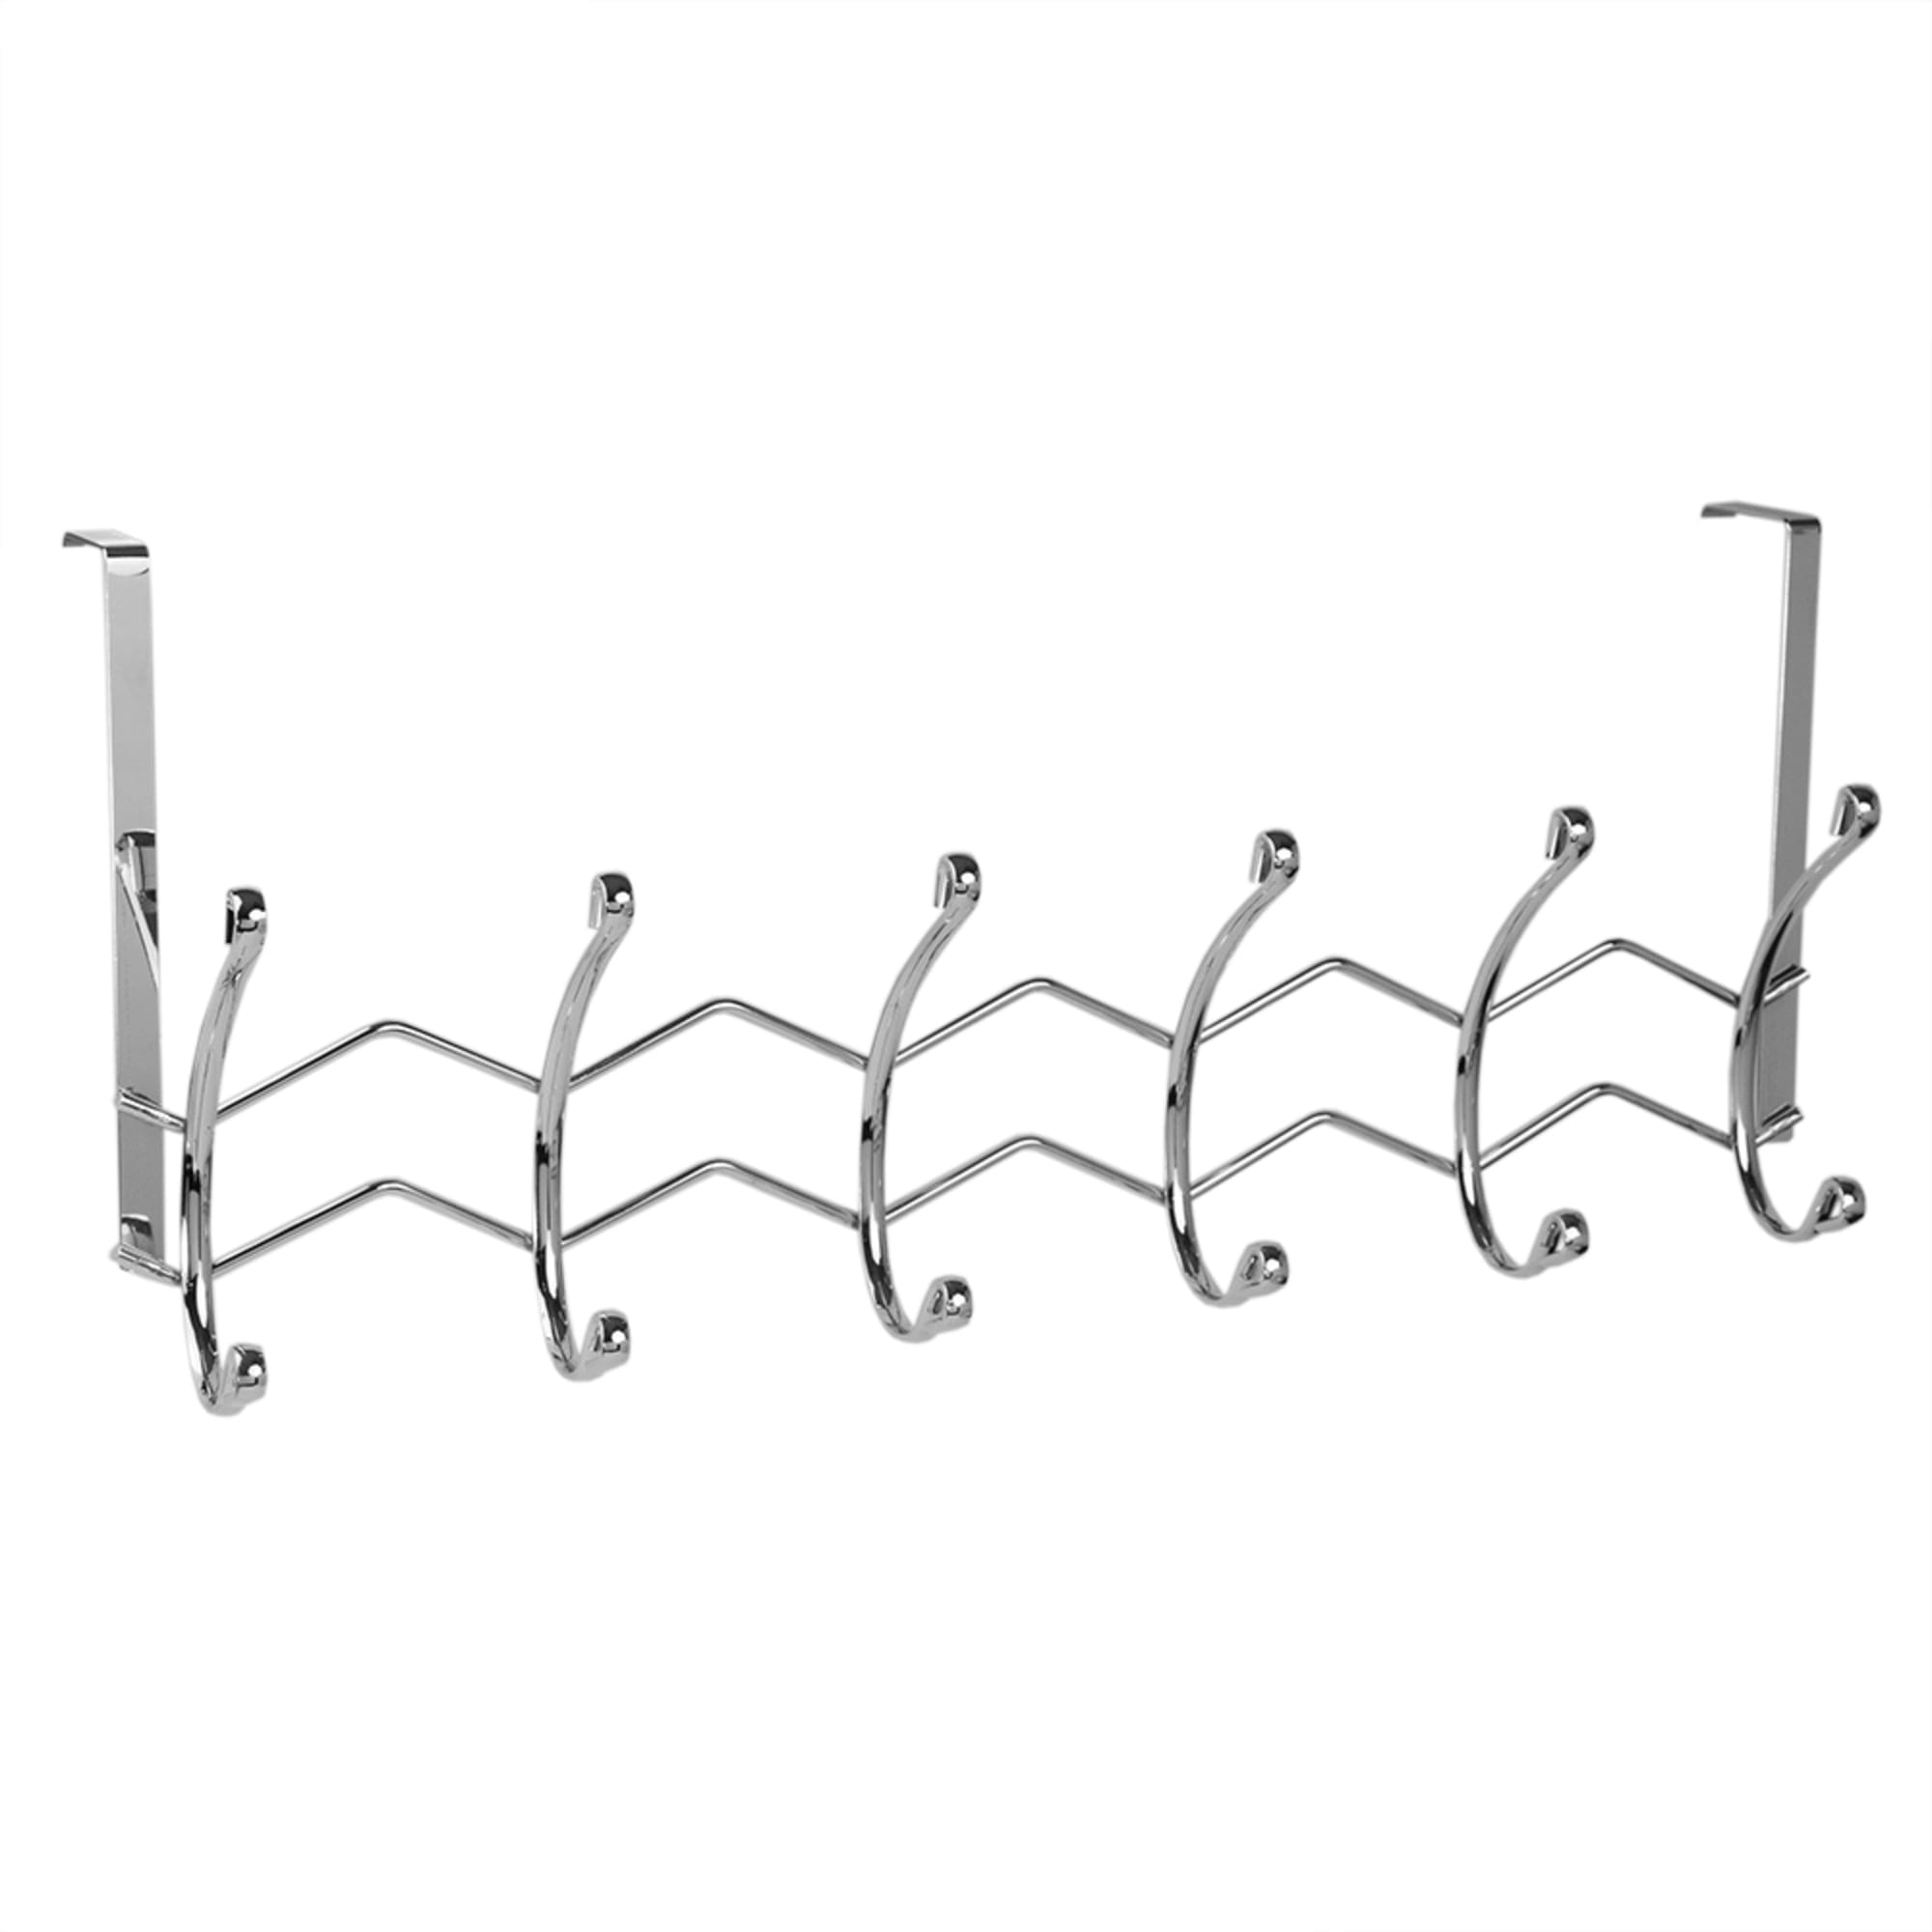 Home Basics Chrome Plated Steel 6 Hook Over the Door Hanging Rack $6.00 EACH, CASE PACK OF 12